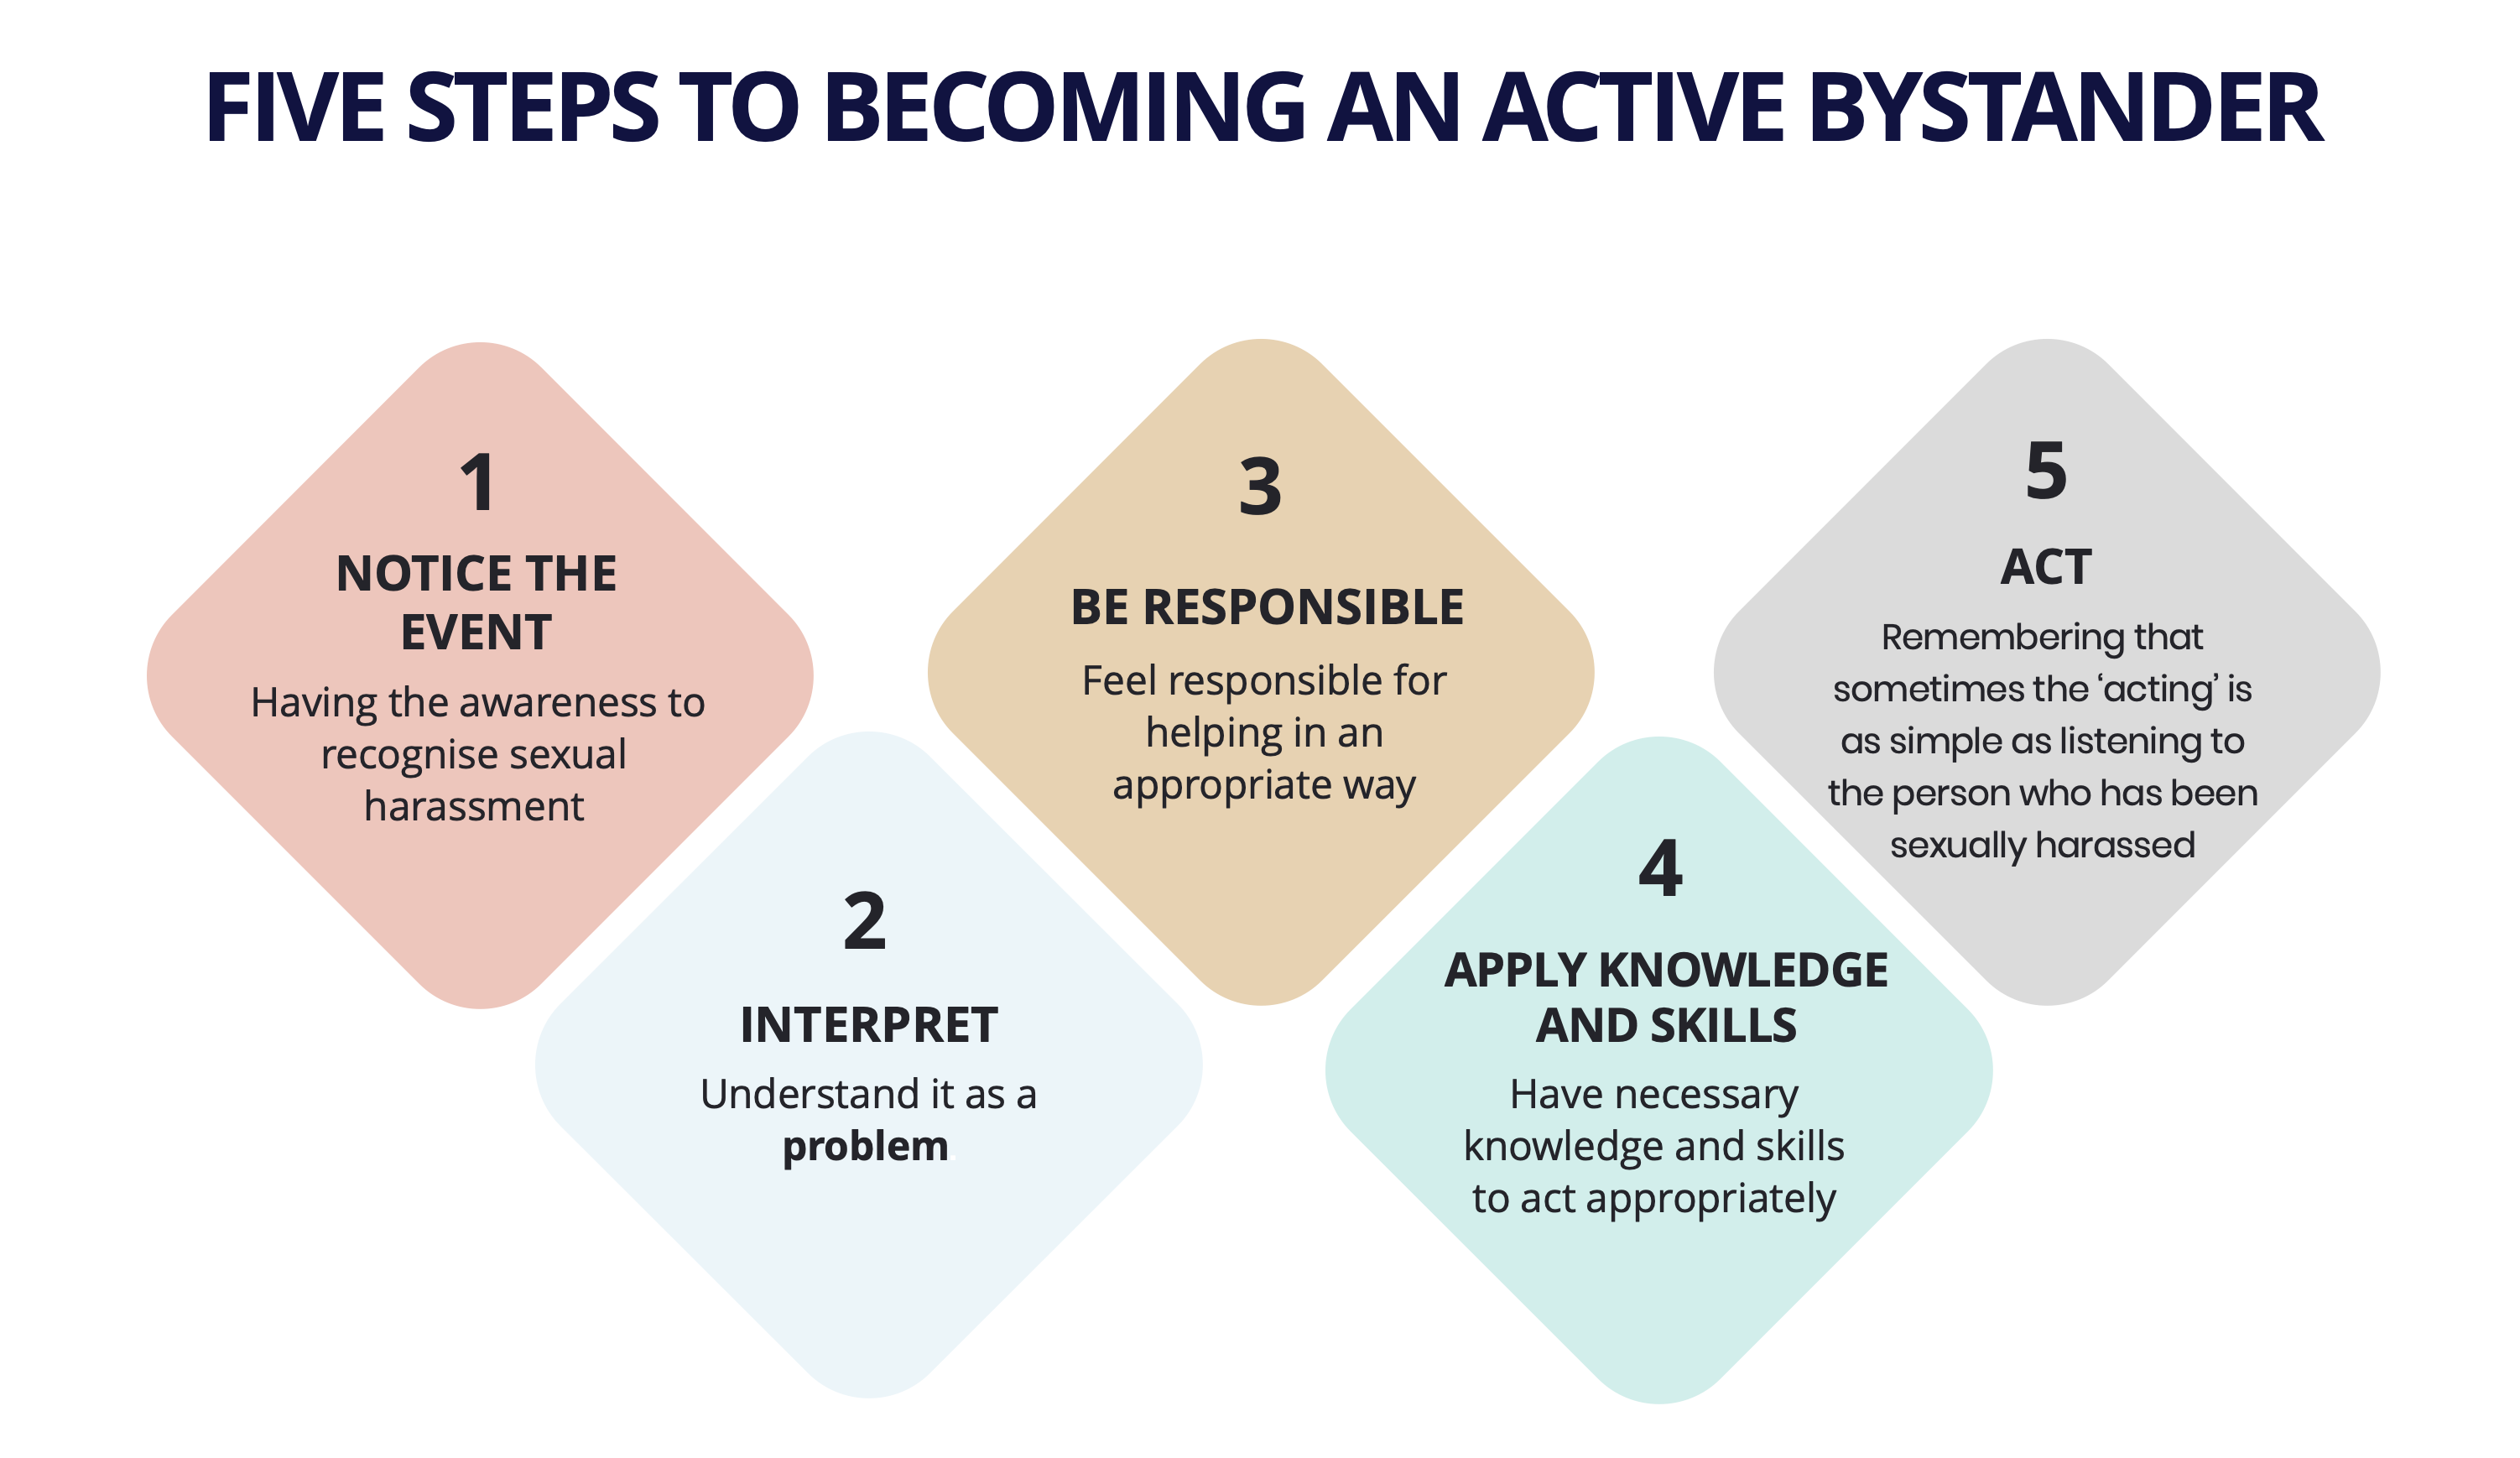 5 steps to becoming an active bystander